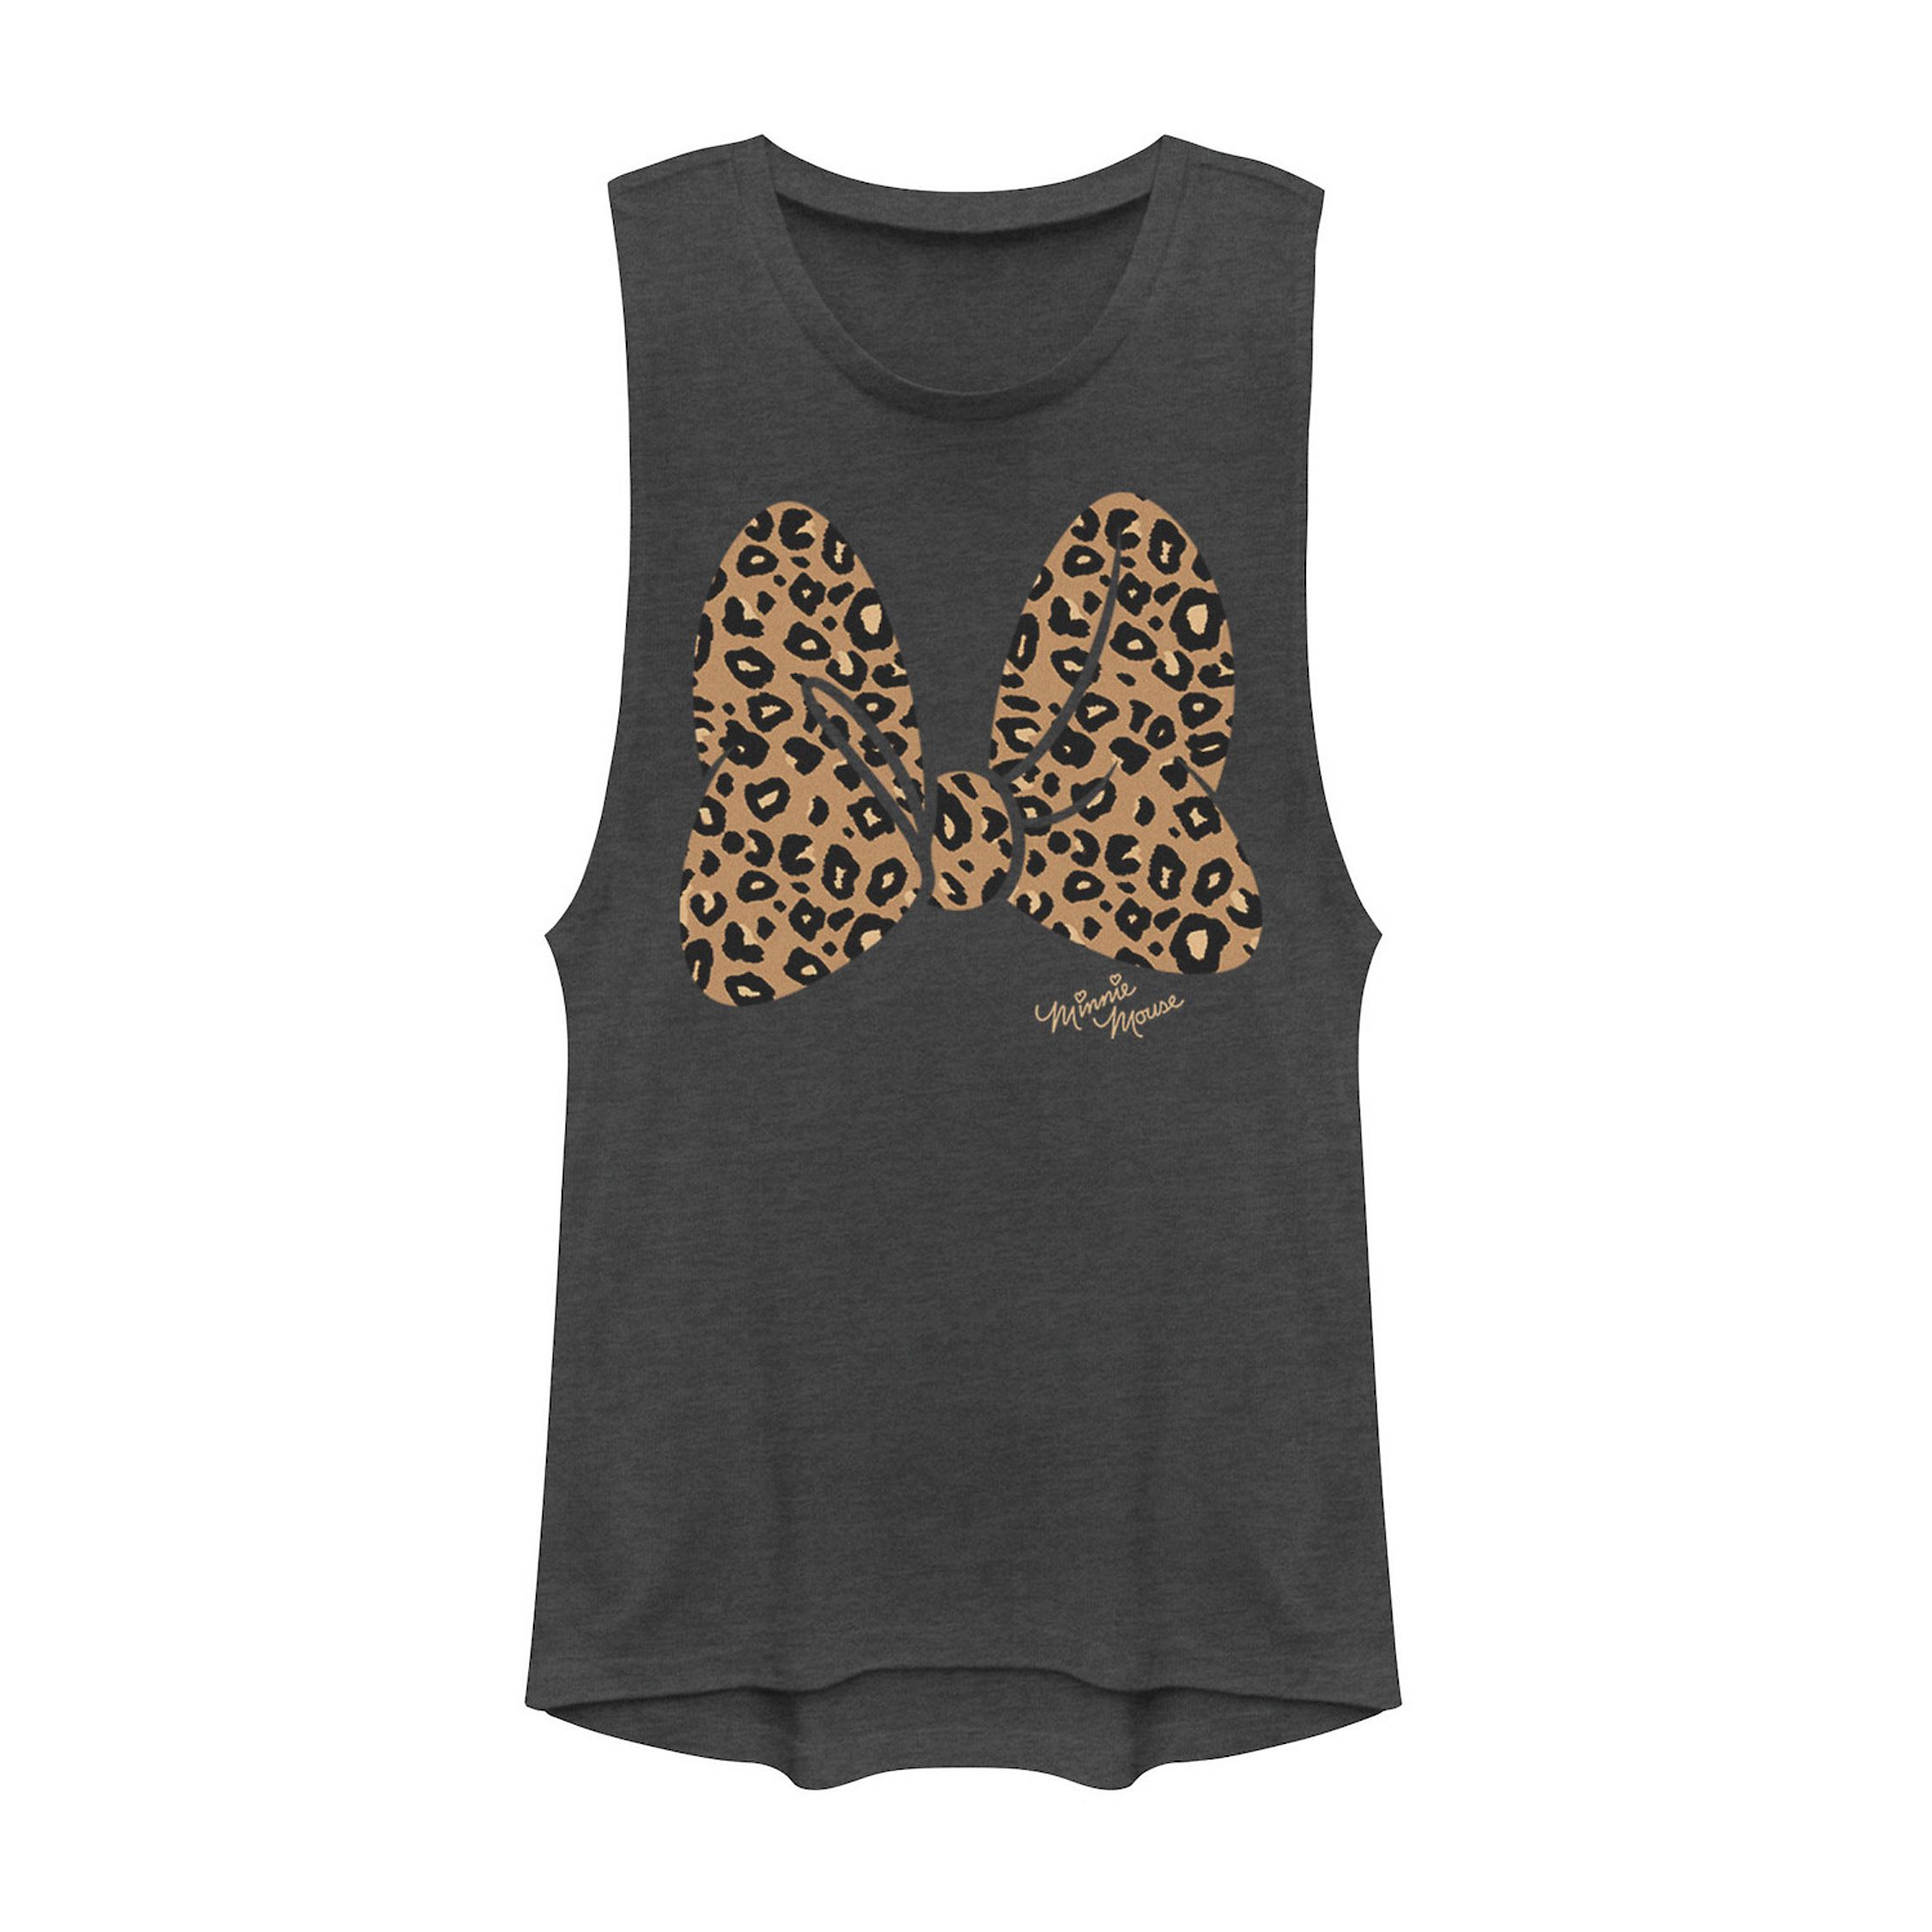 Disney's Minnie Mouse Juniors' Leopard Print Bow Muscle Tee | Kohl's